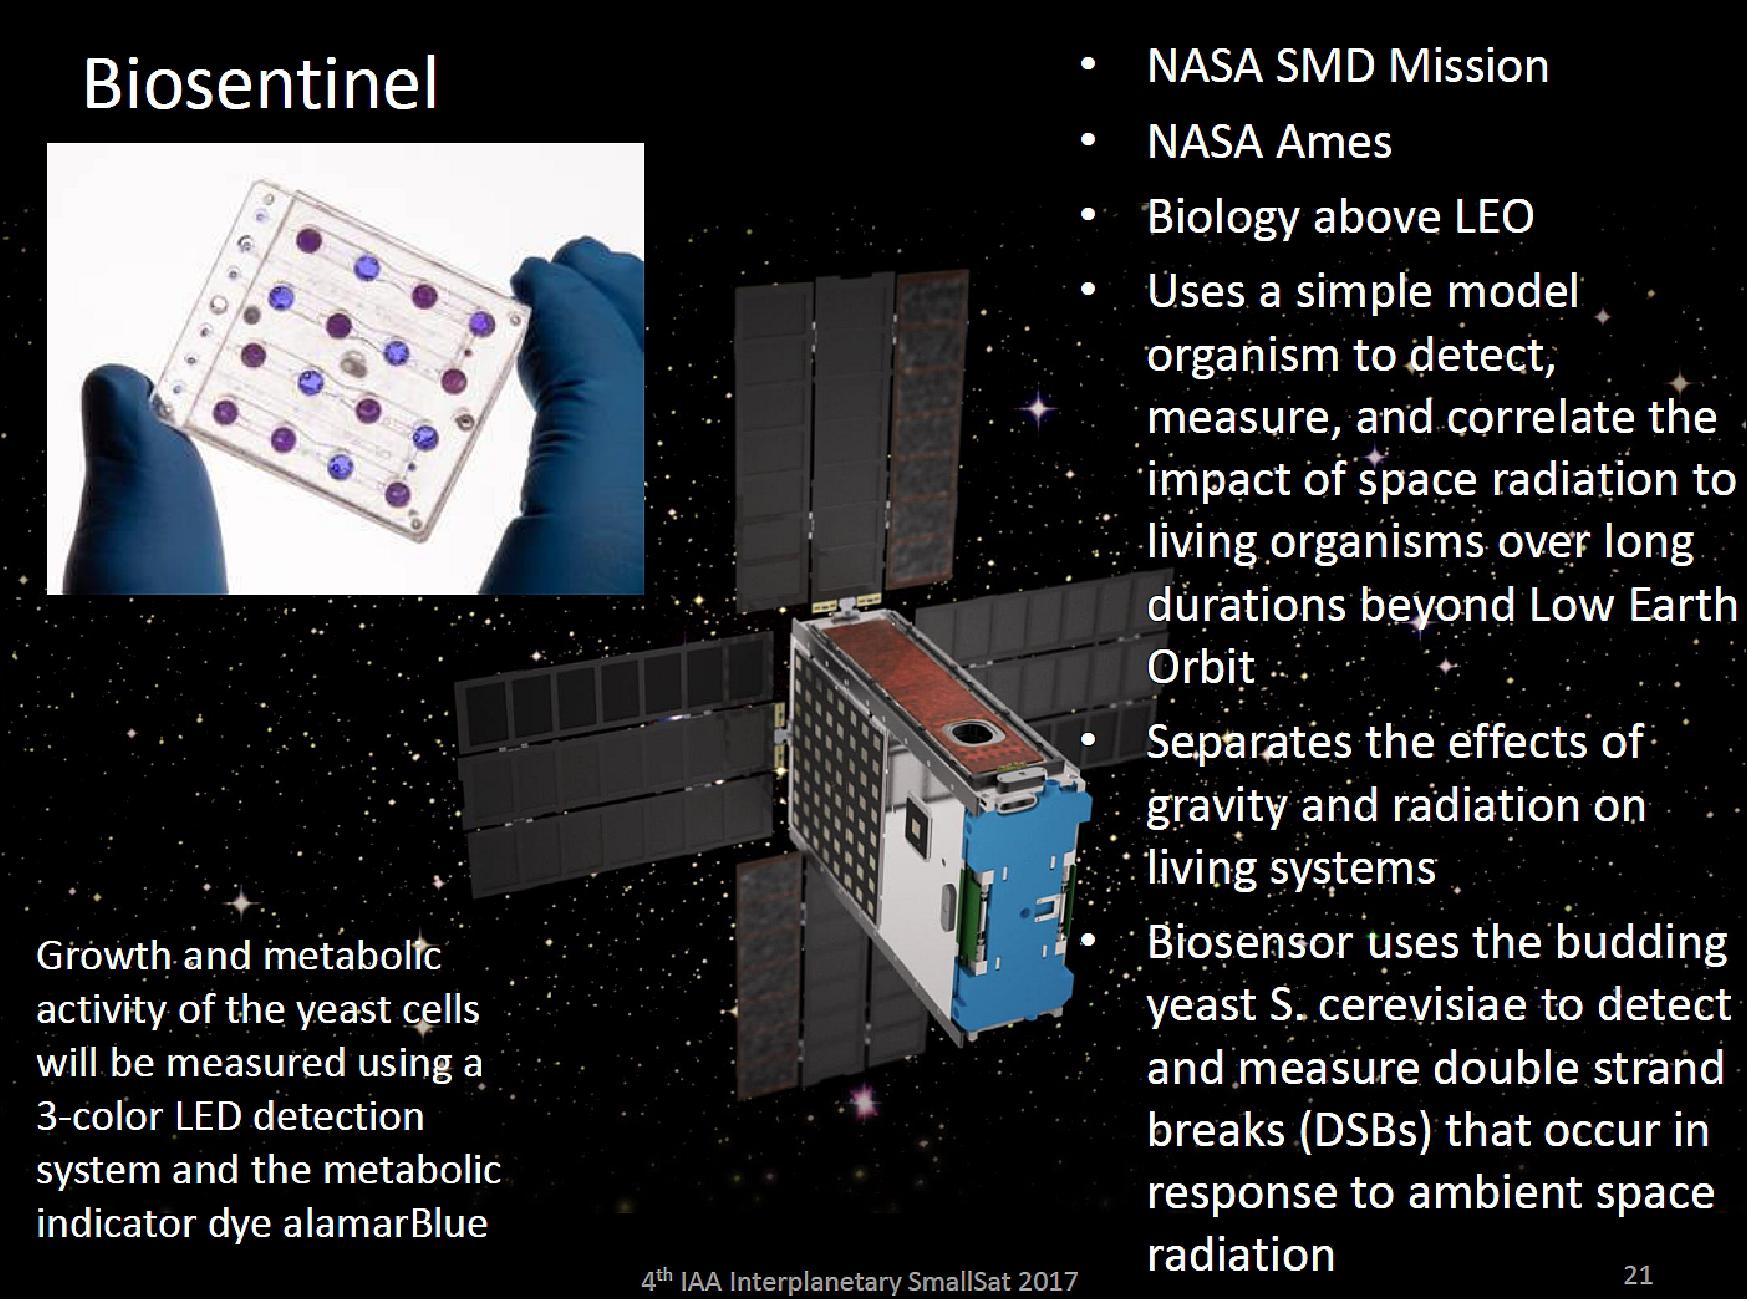 Figure 13: Overview of the BioSentinel mission (image credit: NASA/ARC)